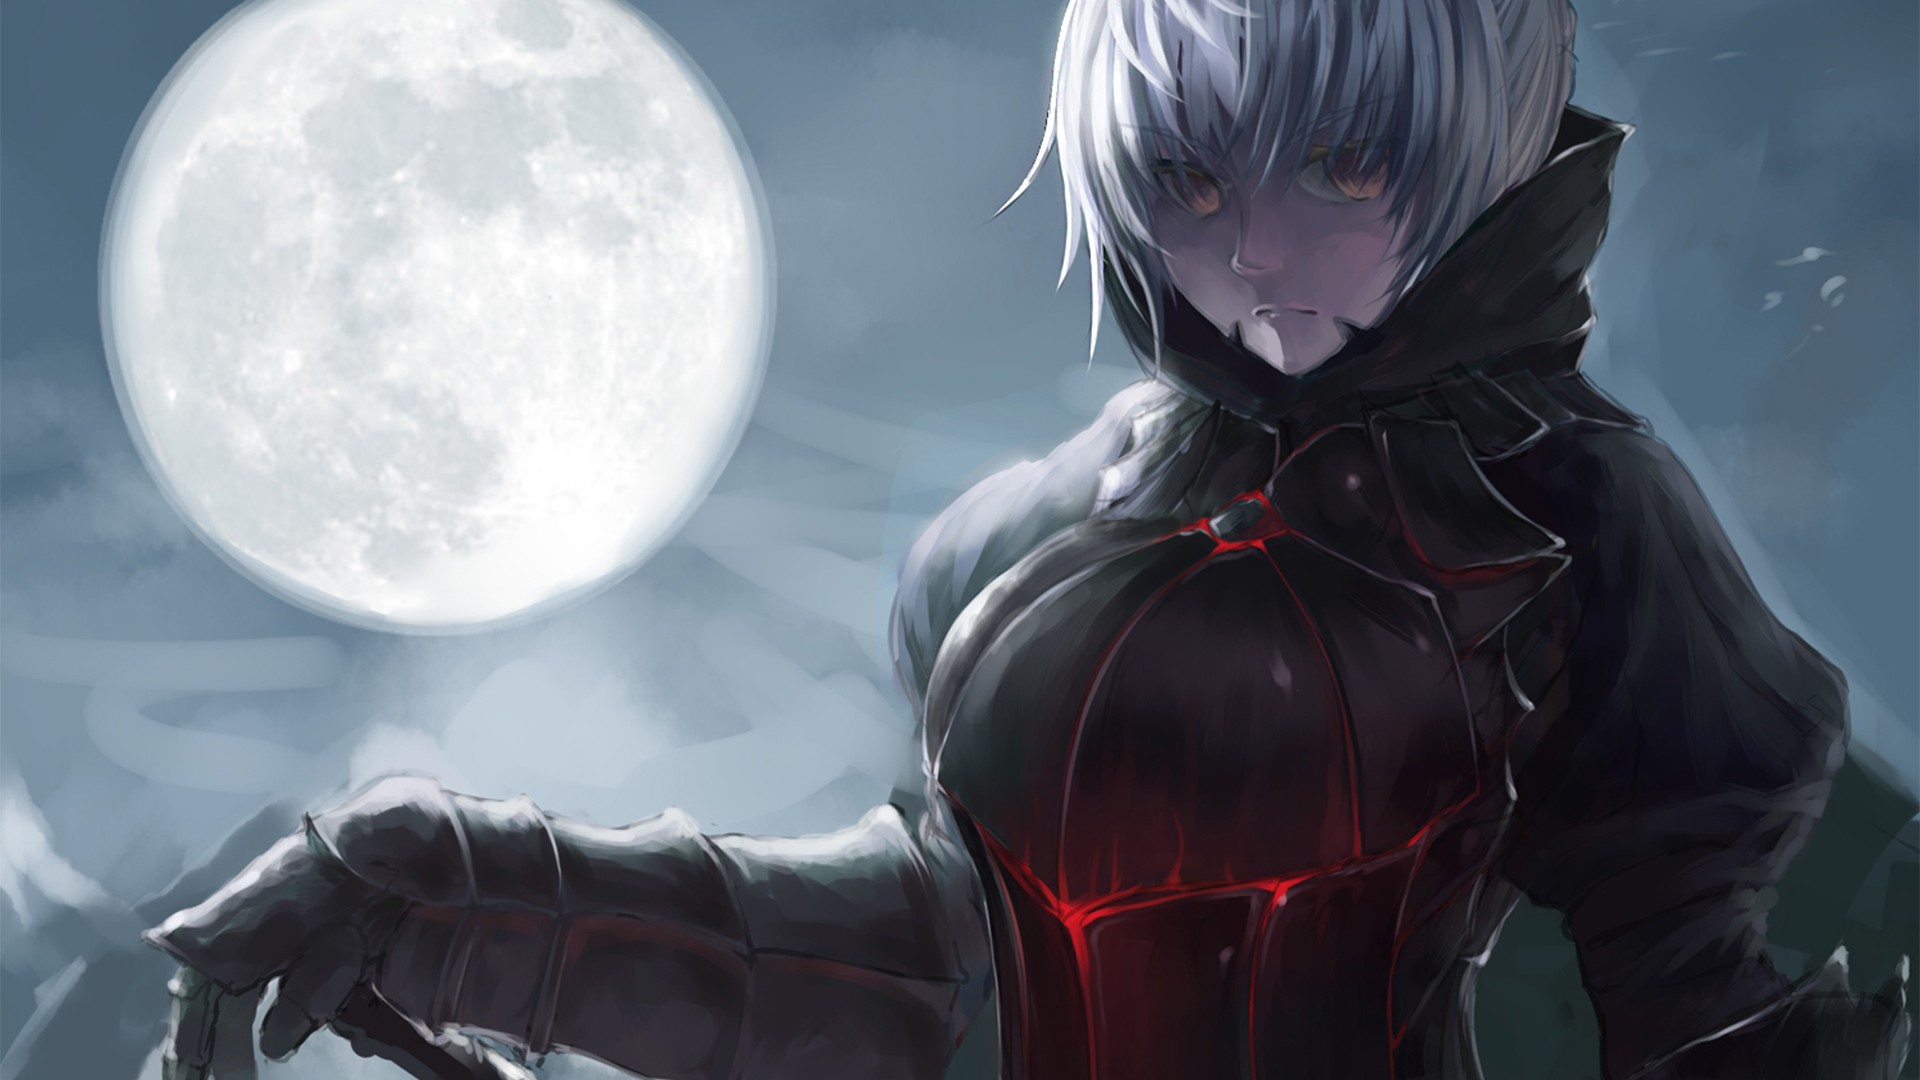 150+ Saber Alter HD Wallpapers and Backgrounds